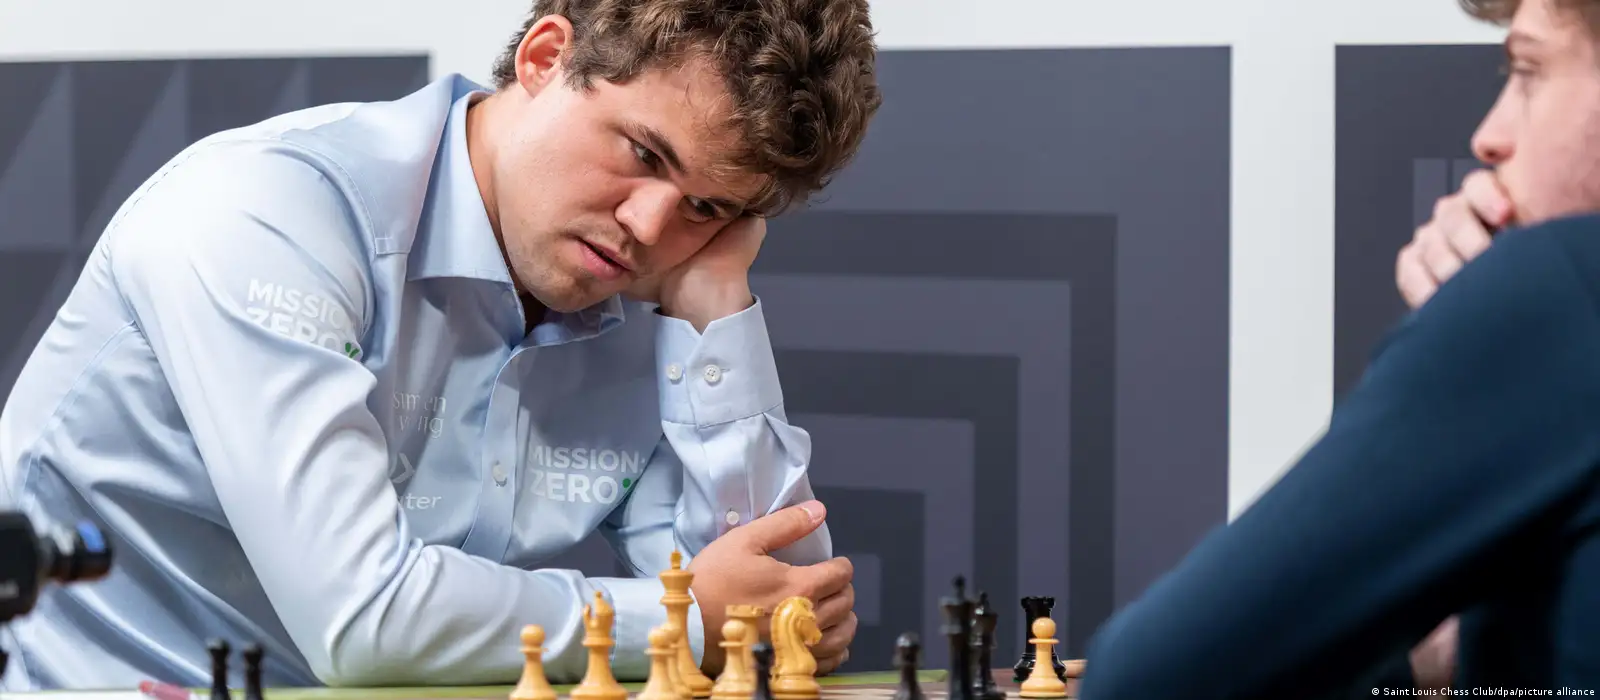 Vox on X: During a tournament, a chess player's blood pressure